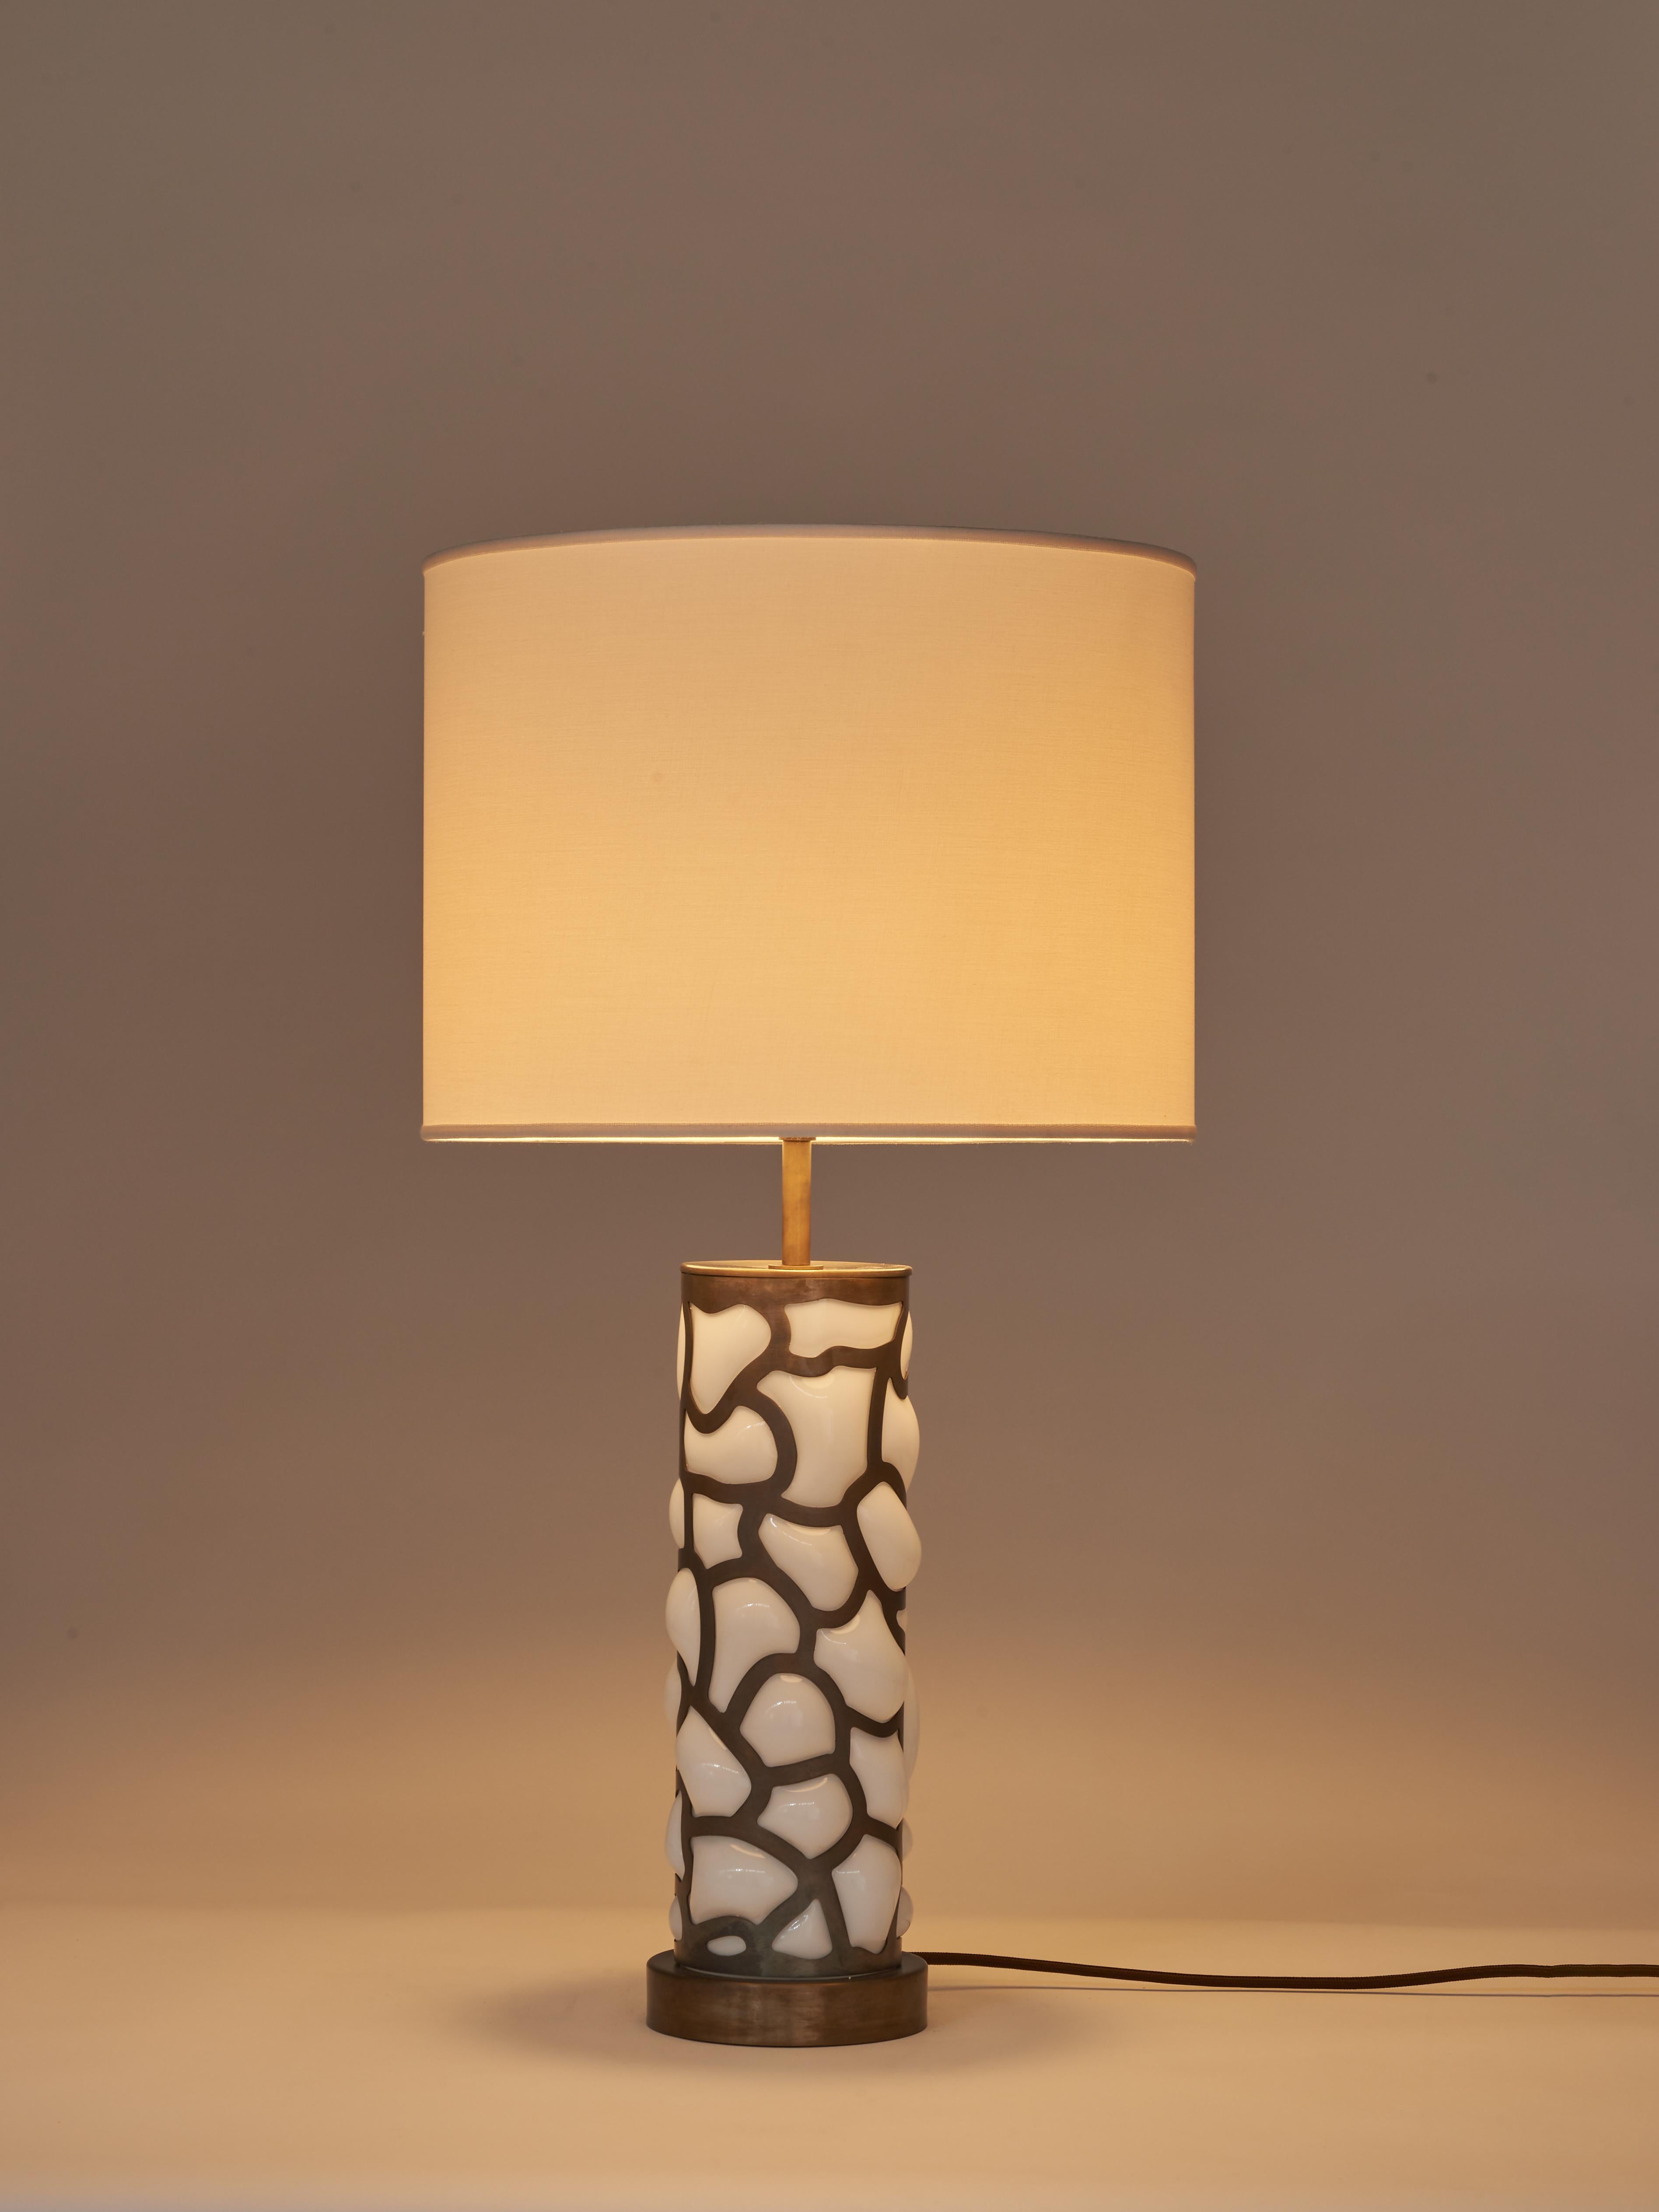 The table lamp from the Blown collection is the combination of advanced laser cutting technologies and the thousand-year-old practice of Murano glass blowing. Its brass cage structure with cloud pattern is complemented by Murano glass blown inside,